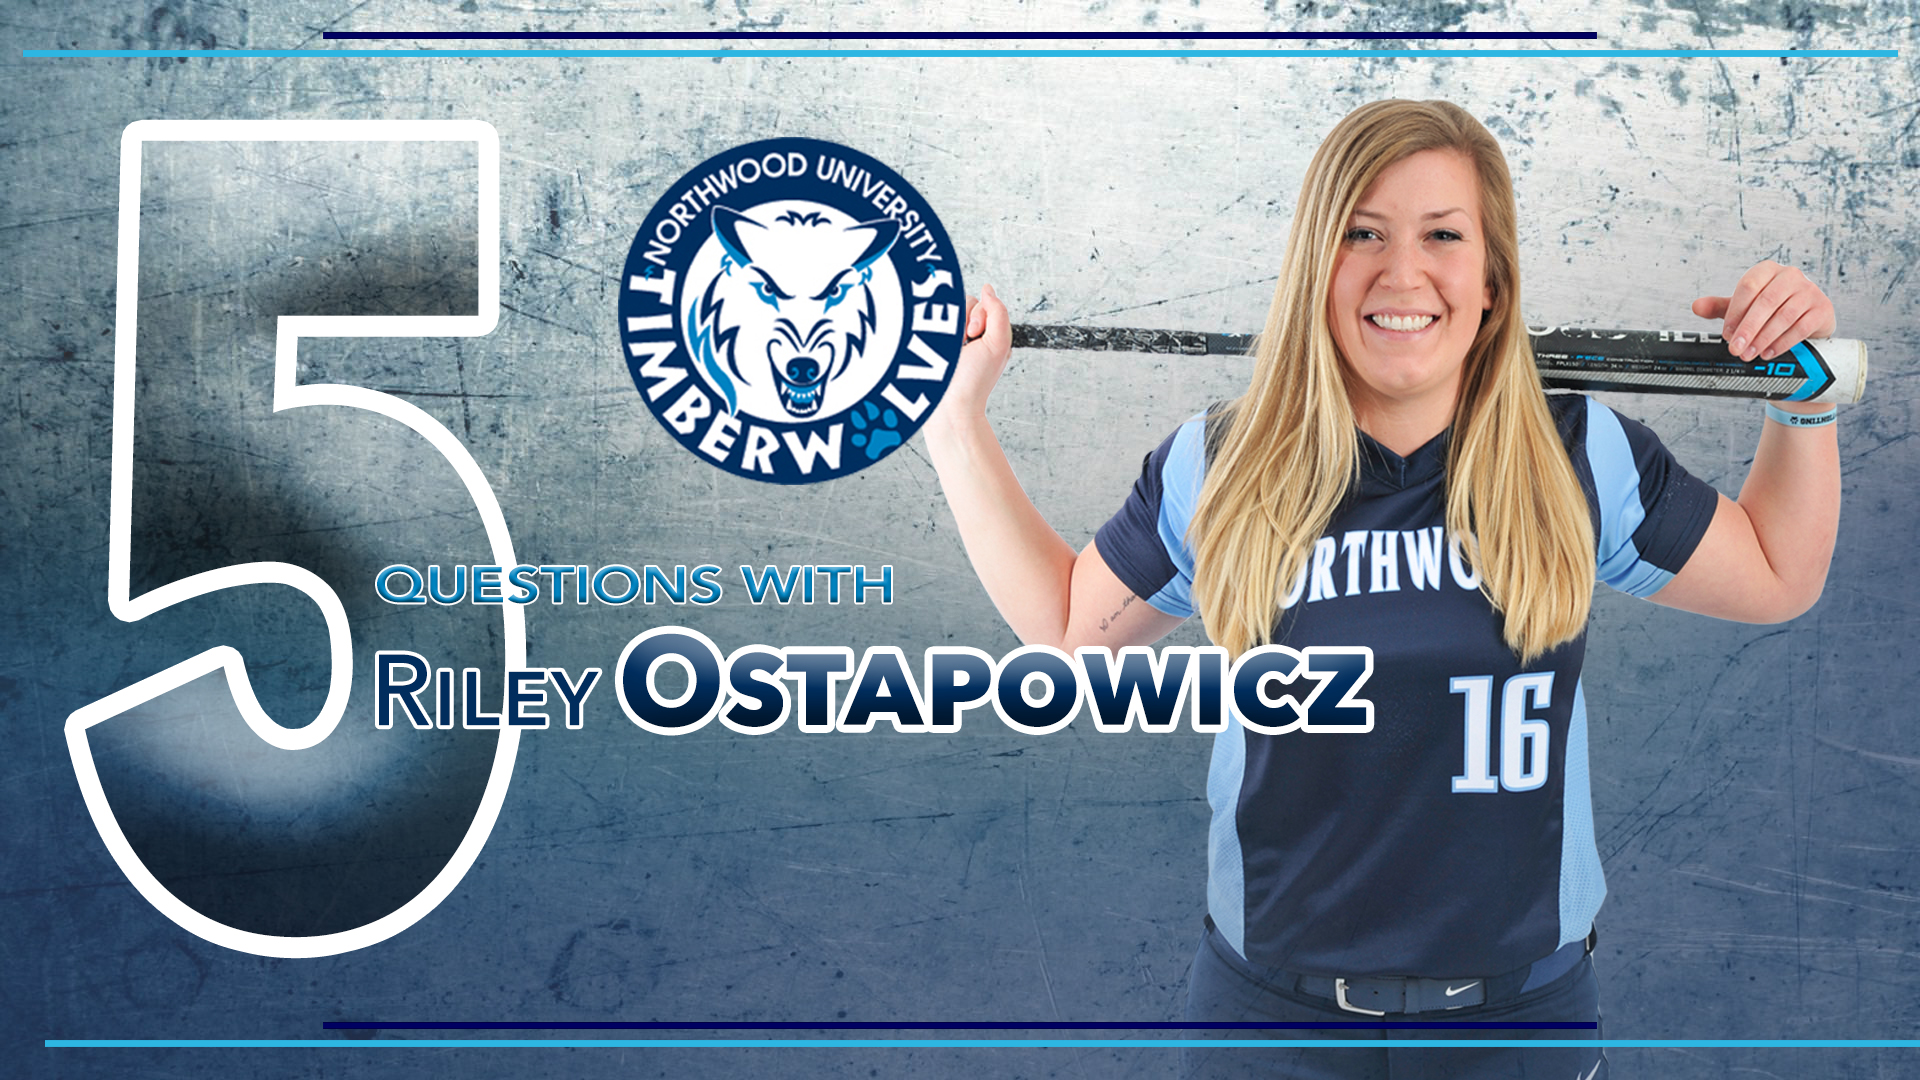 Northwood Athletics - 5 Questions with Riley Ostapowicz